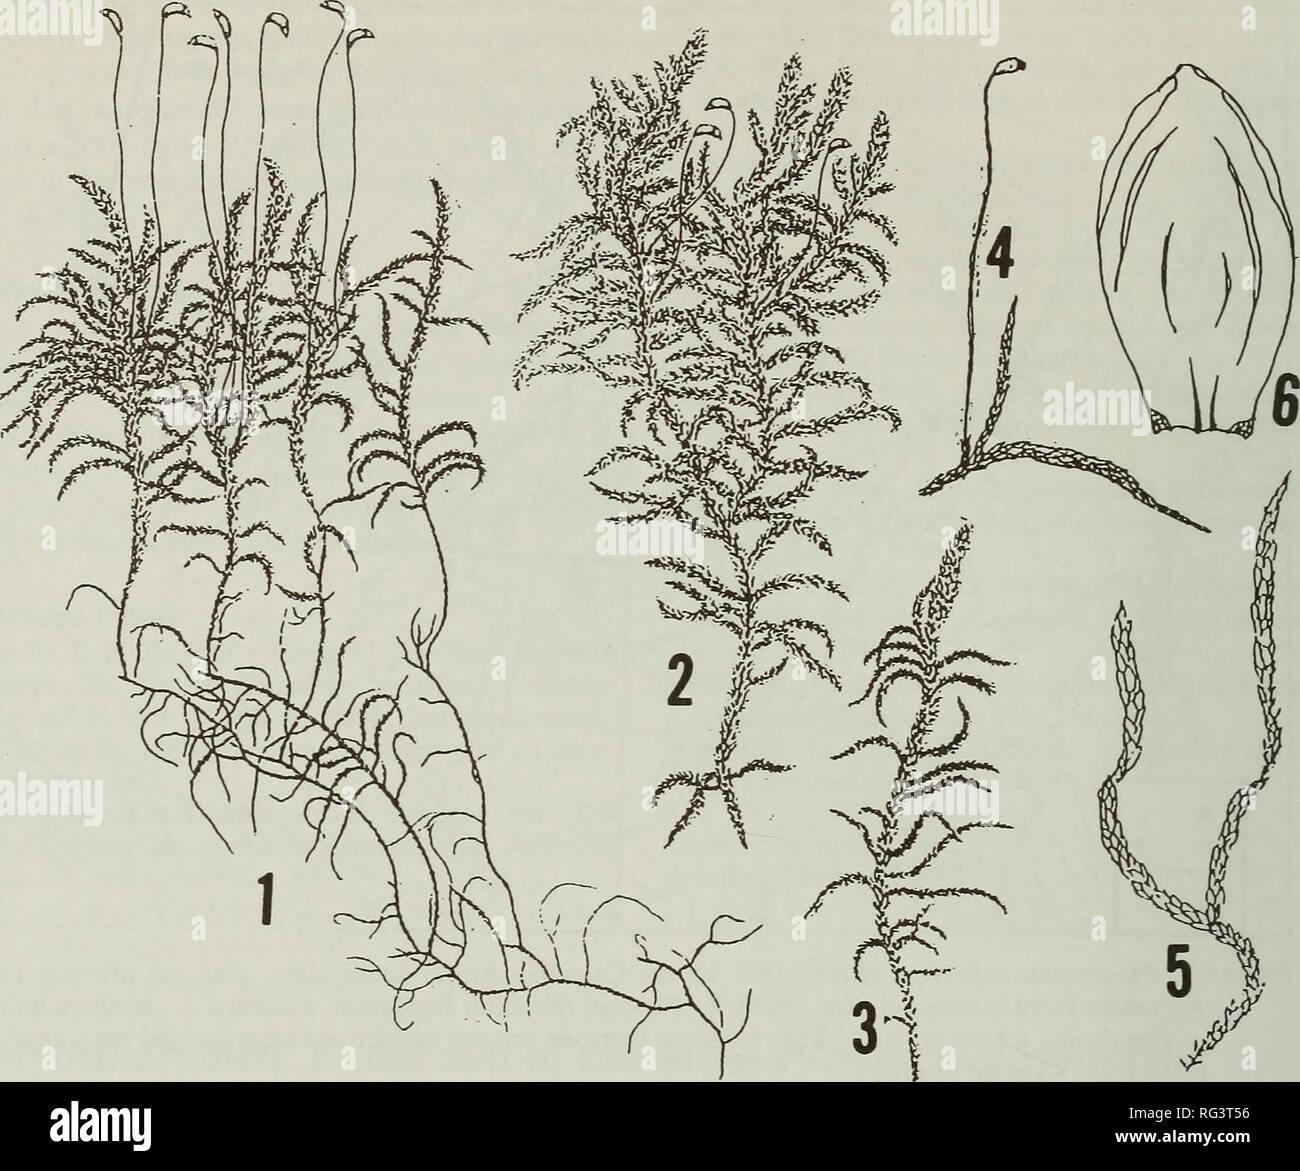 . The Canadian field-naturalist. Natural history. 632 The Canadian Feeld-Naturalist Vol. Ill. Figure 3. Habitual morphoses of Pleurozium schreberi (Brid.) Mitt: 1 - luxuriant specimens (5-10 cm tall, mea- sured from herbarium specimens); 2 - average specimens (5-15 cm tall); 3 - depressed specimen (ca. 5 cm); 4 - strongly depauperate (fertile) Siberian specimen (2x); 5 - Alexandra Fiord specimen (ca. 2.5 cm long); 6 - leaf of Alexandra Fiord specimen (ca. 2.2 mm long). 1-3, after &quot;Bryologia Europaea&quot;; 4, after Gangulee (1978). schreberi is greatly reduced, with a hiatus in the cen- t Stock Photo